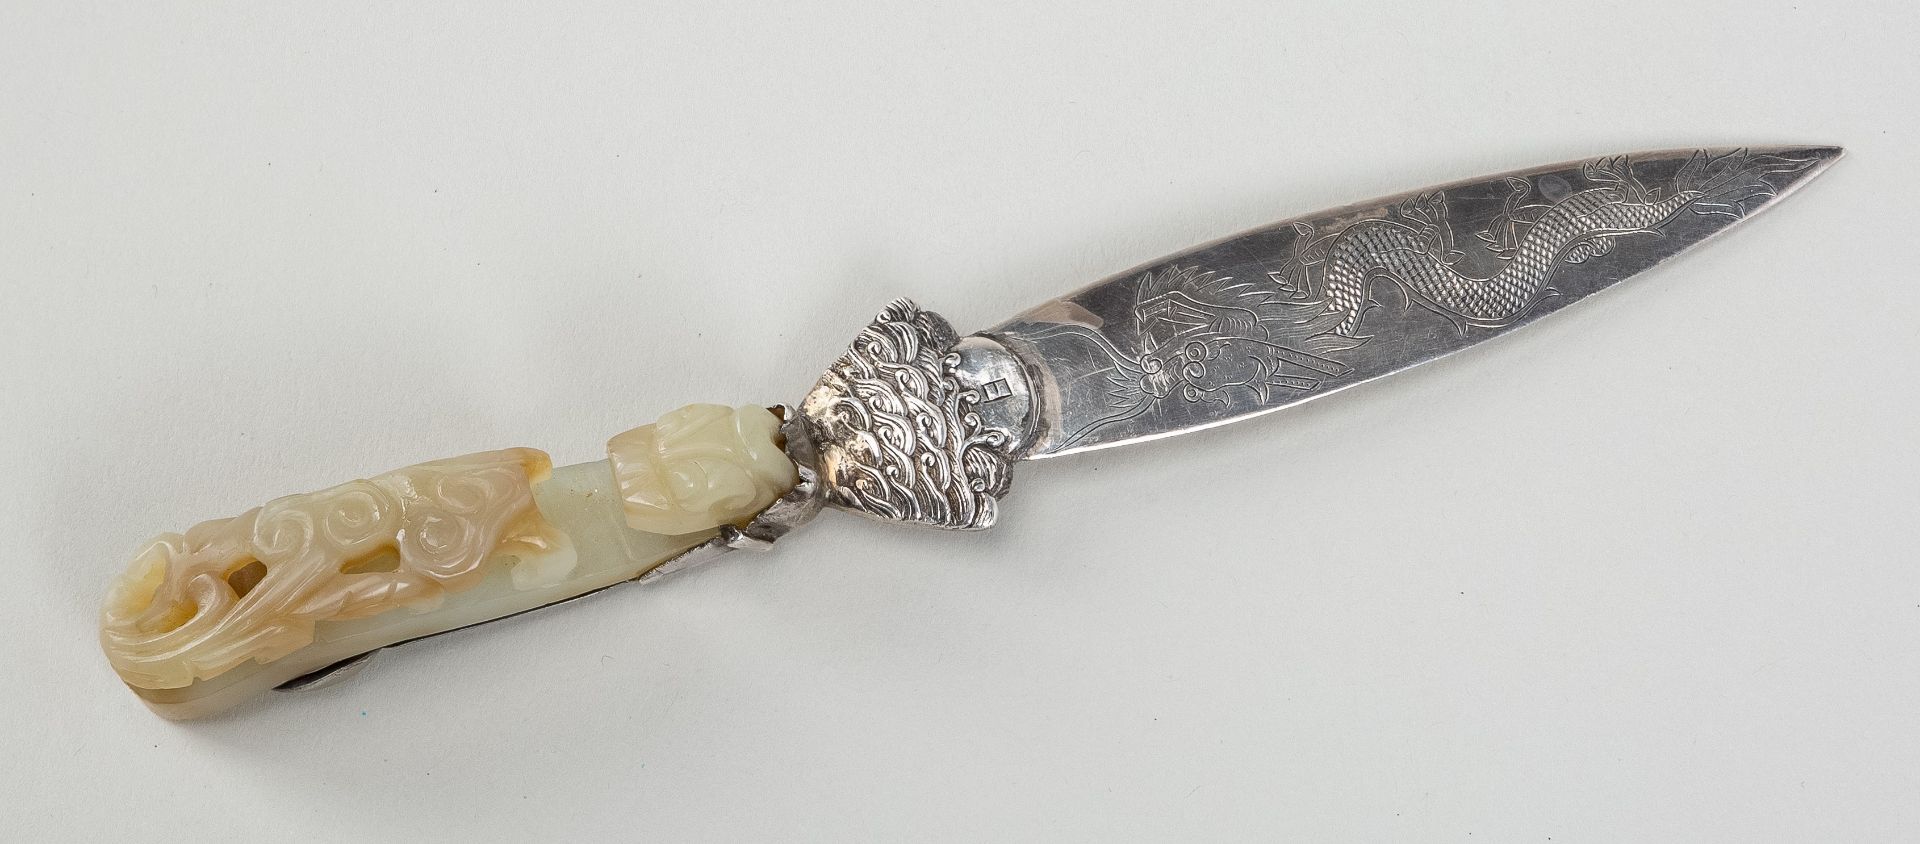 A PALE CELADON JADE 'CHILONG' BELT HOOK MOUNTED IN SILVER AS A LETTER OPENER, 19th CENTURY